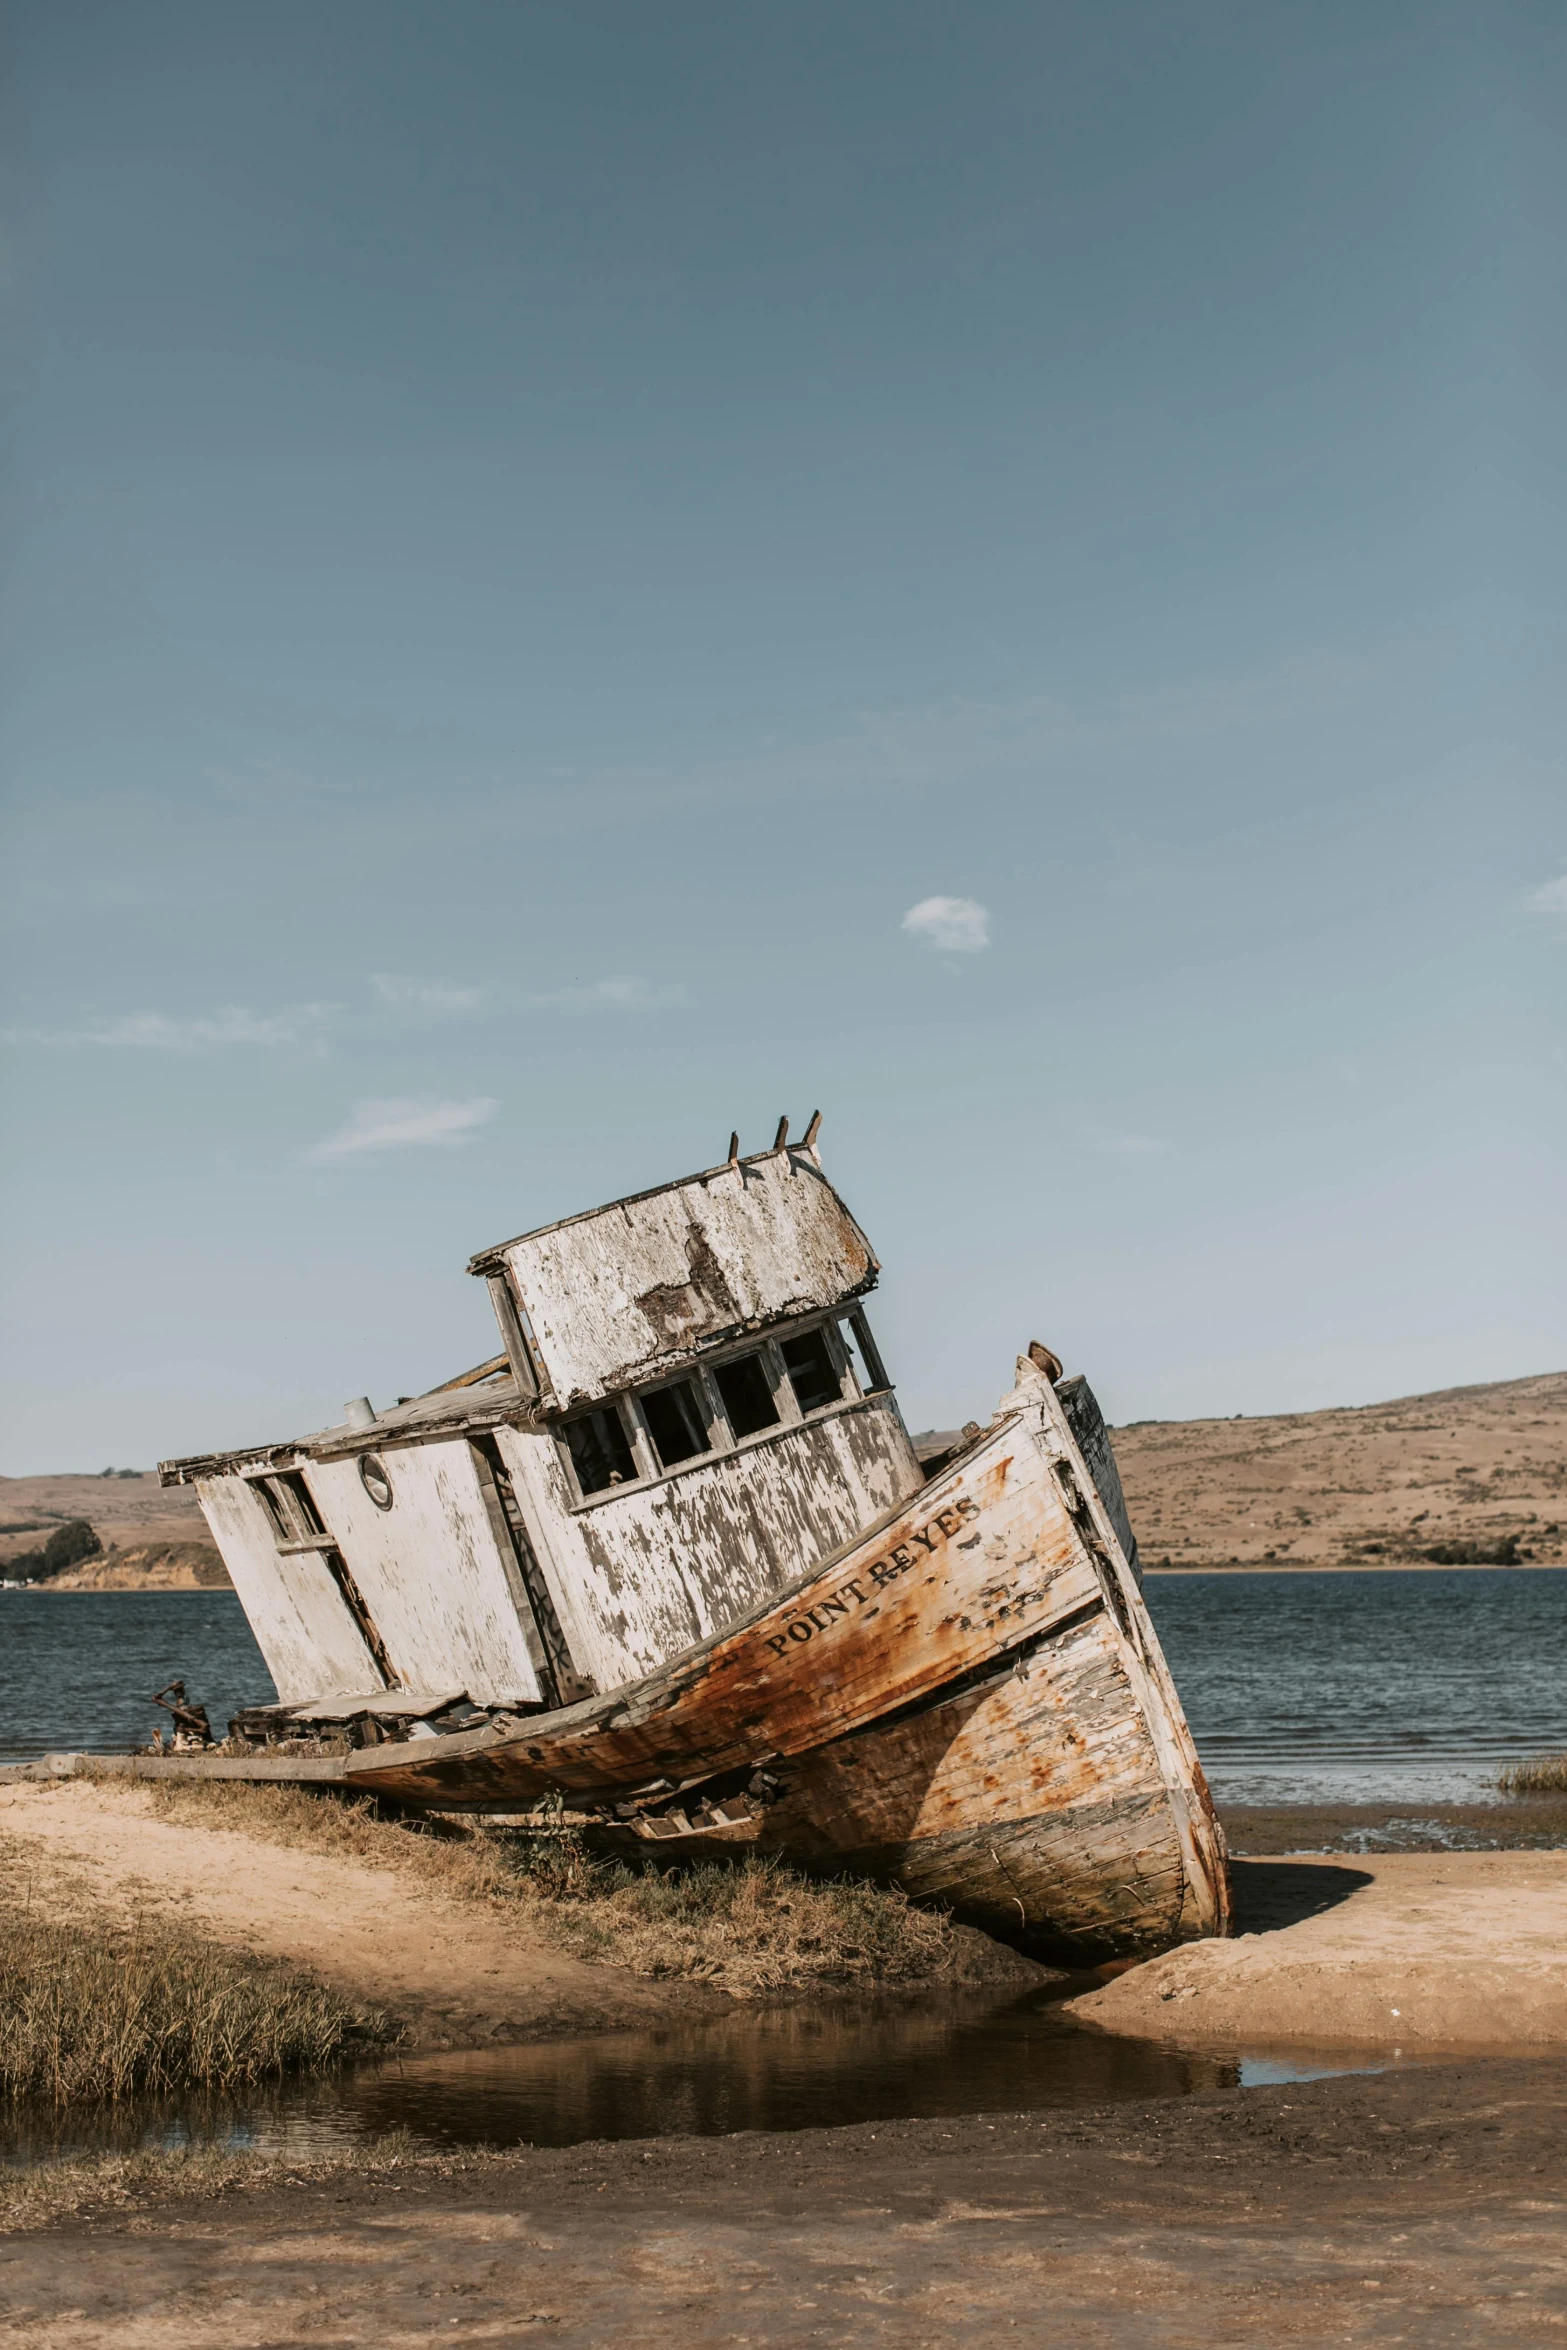 a boat sitting on top of a sandy beach, unsplash contest winner, post apocalyptic san francisco, with damaged rusty arms, exterior, ship on lake